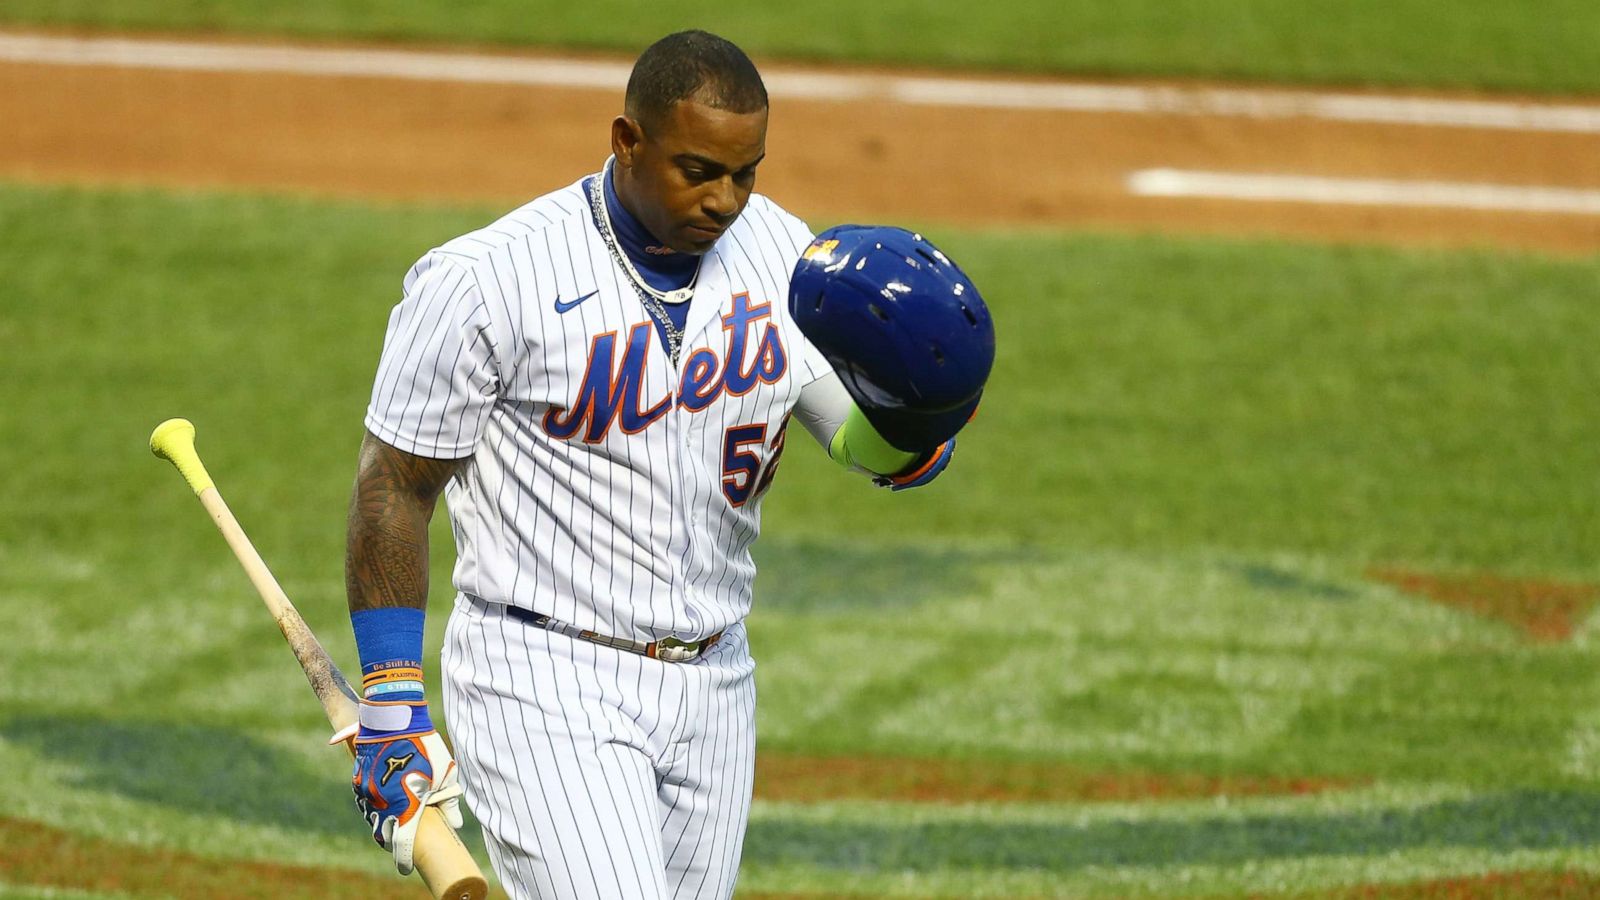 Mets Yoenis Cespedes Latest Mlb Player To Opt Out Of Season Due To Coronavirus Concerns Abc News